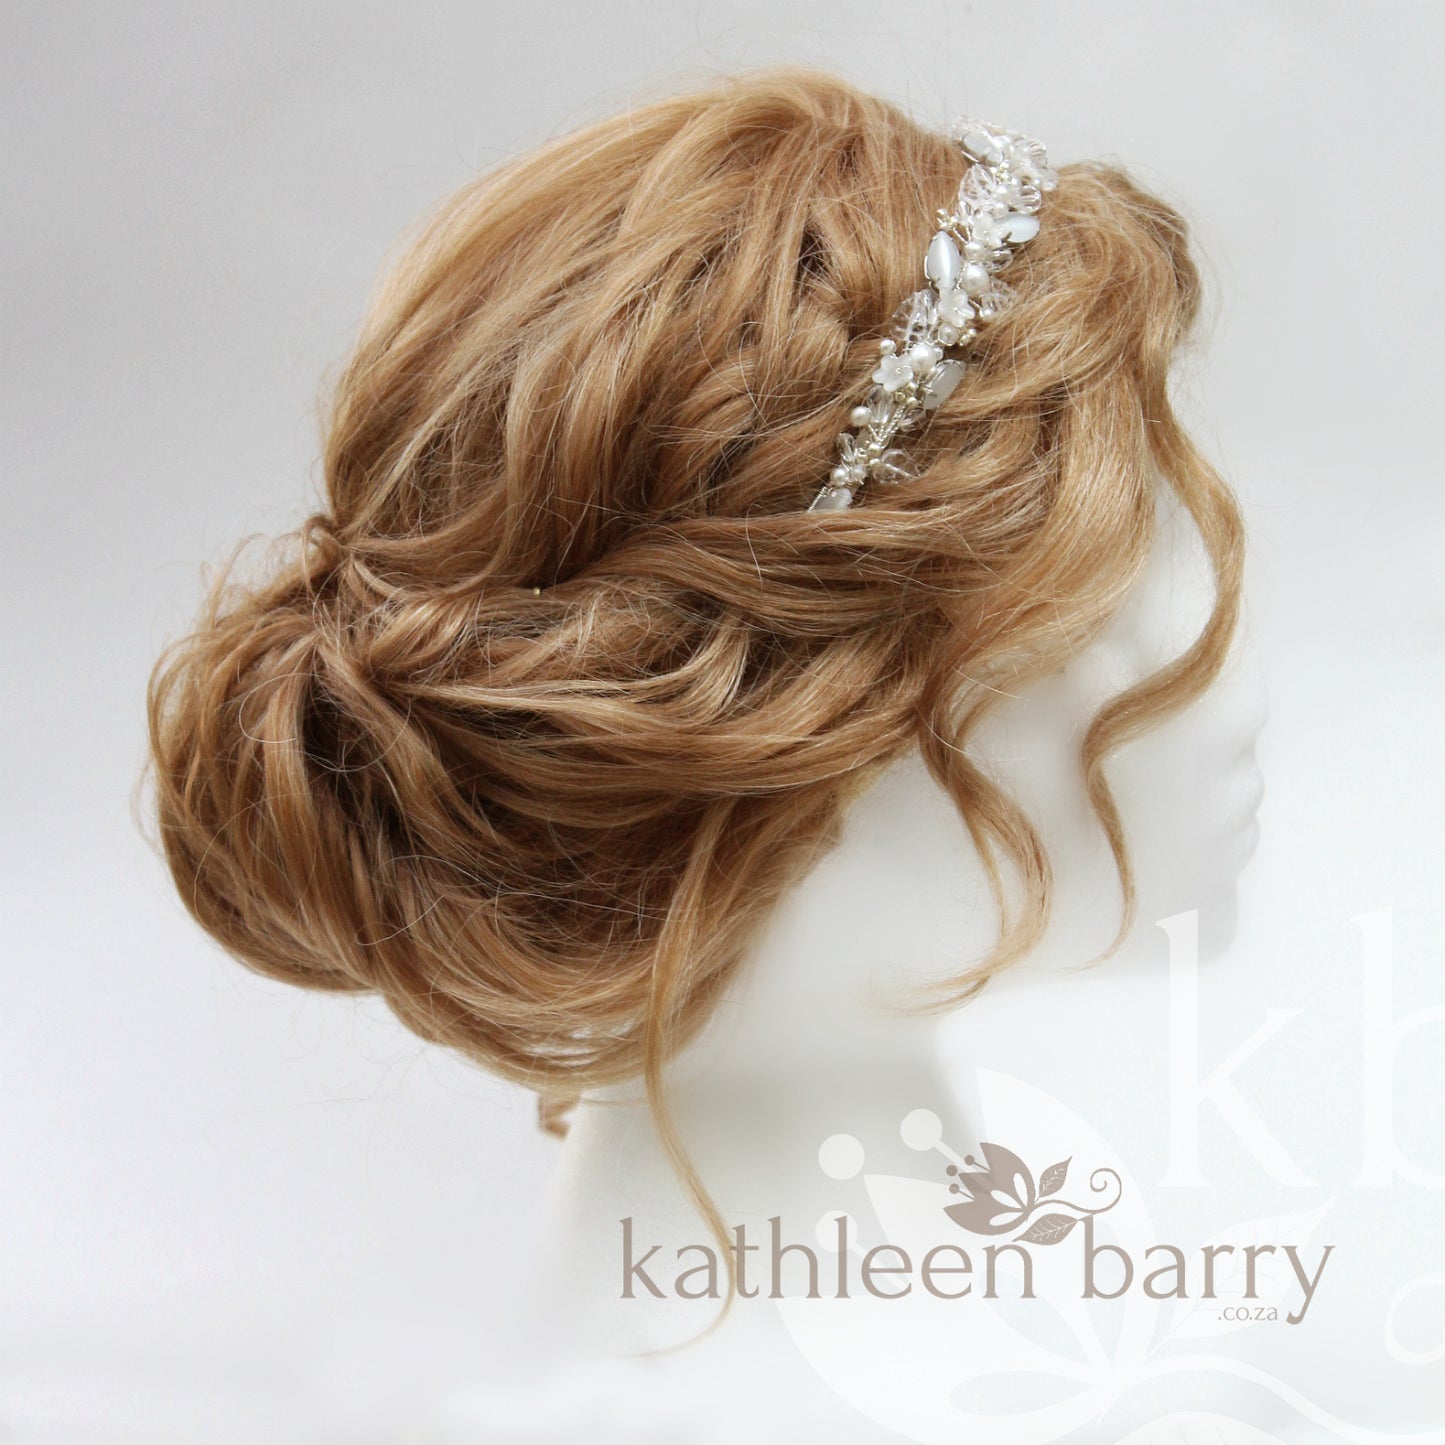 Freya floral jewelled headband - color variations on wirework, leaves & pearls available